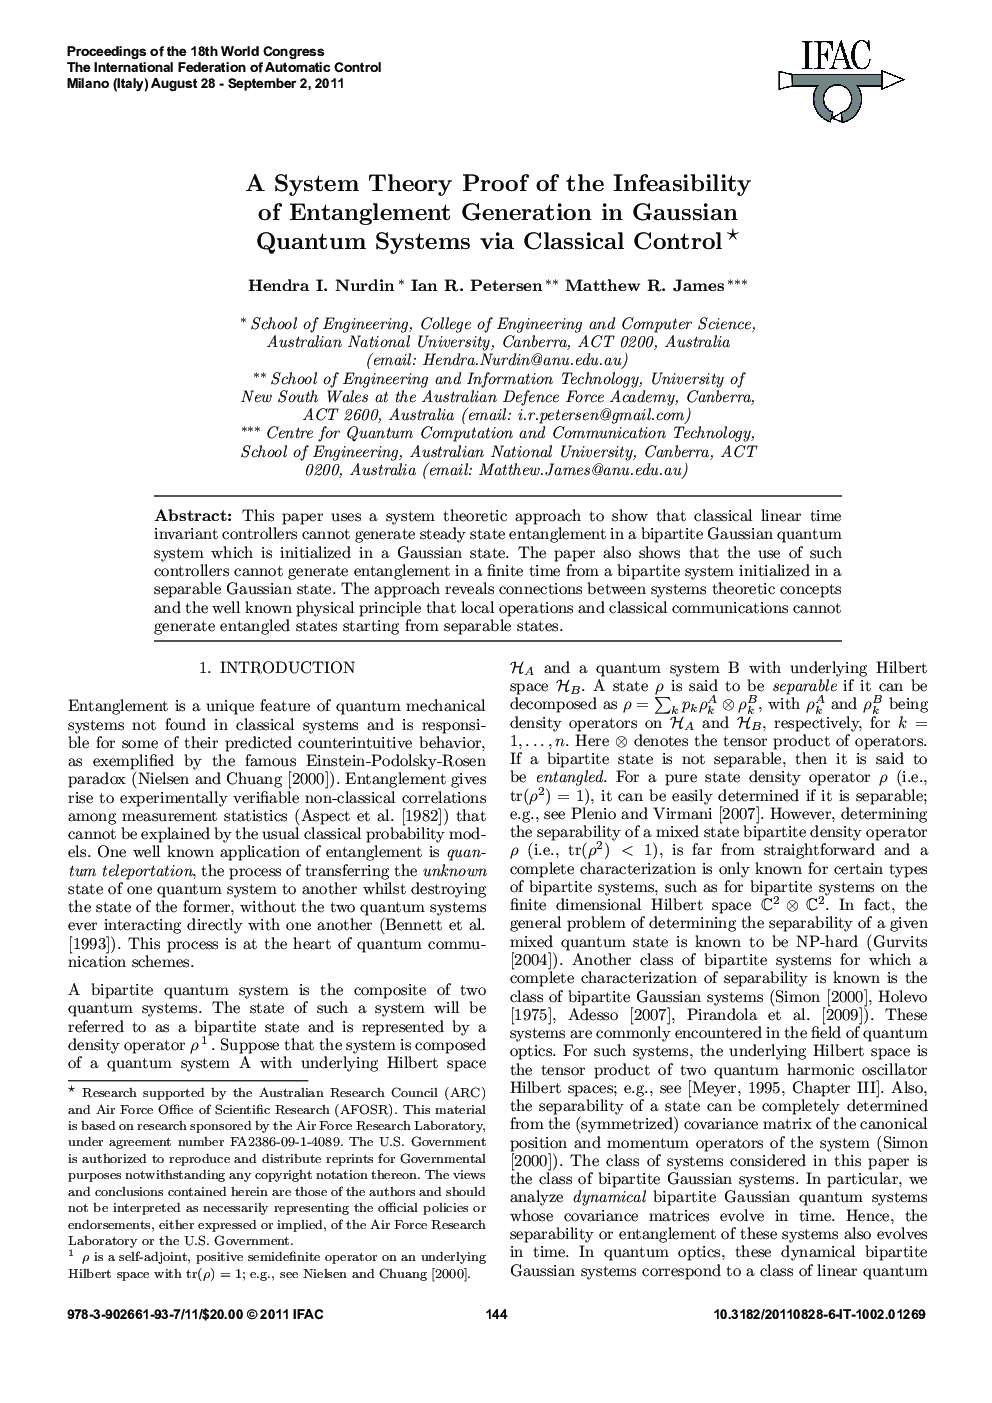 A System Theory Proof of the Infeasibility of Entanglement Generation in Gaussian Quantum Systems via Classical Control 